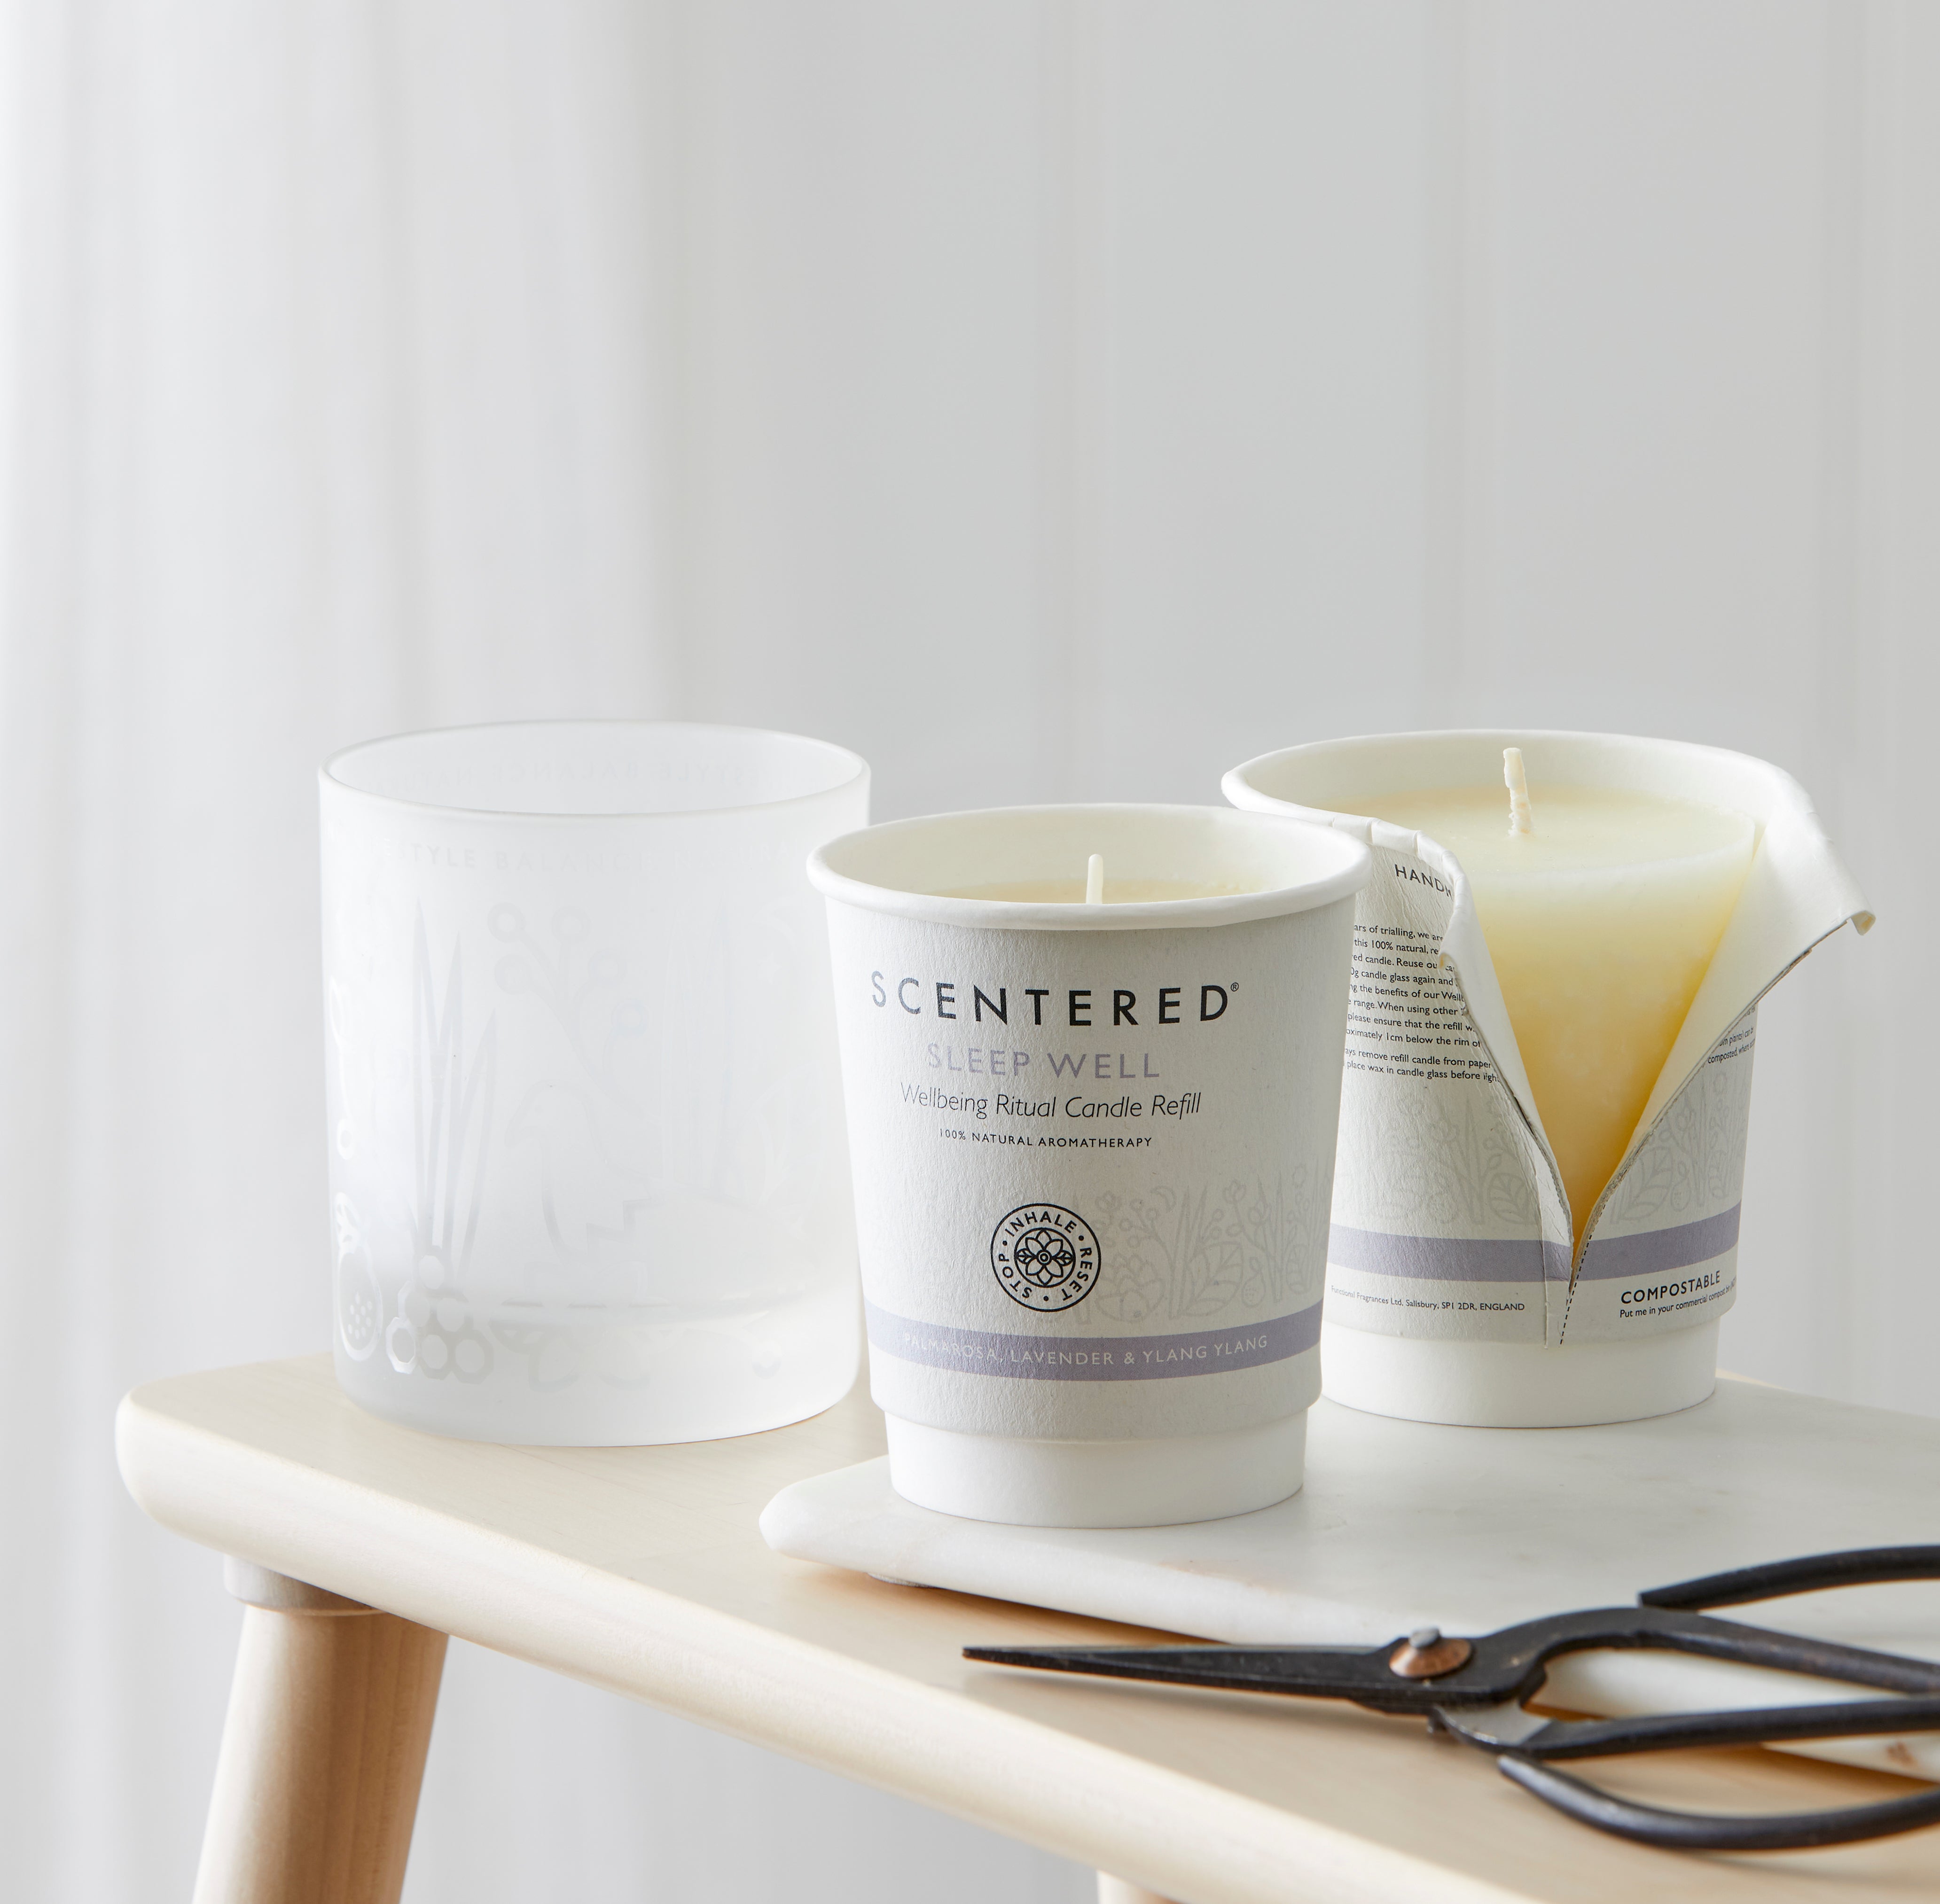 Scentered Sleep Well Home Aromatherapy Candle Refill Duo